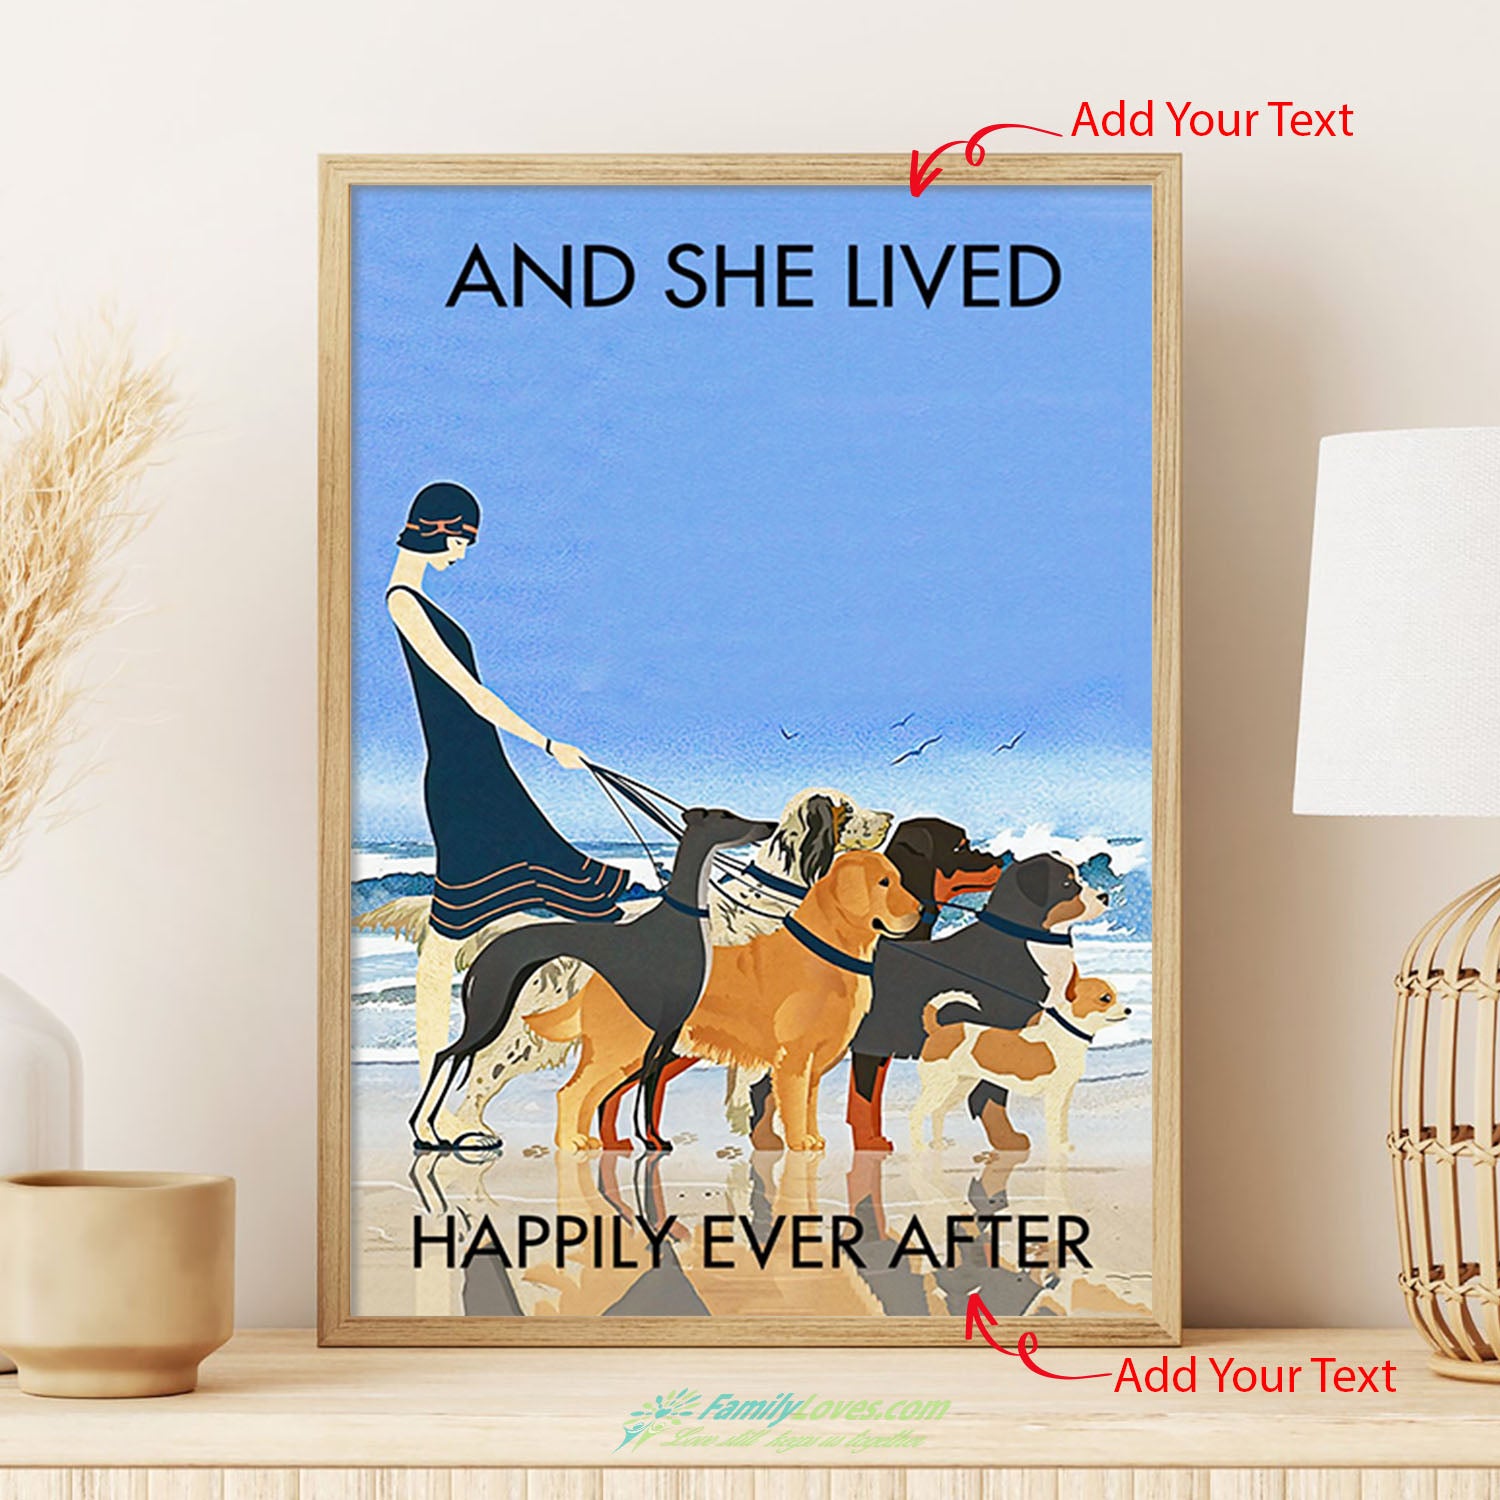 And She Lived Happily Ever After Canvas Wall Decor Poster 36X24 All Size 1